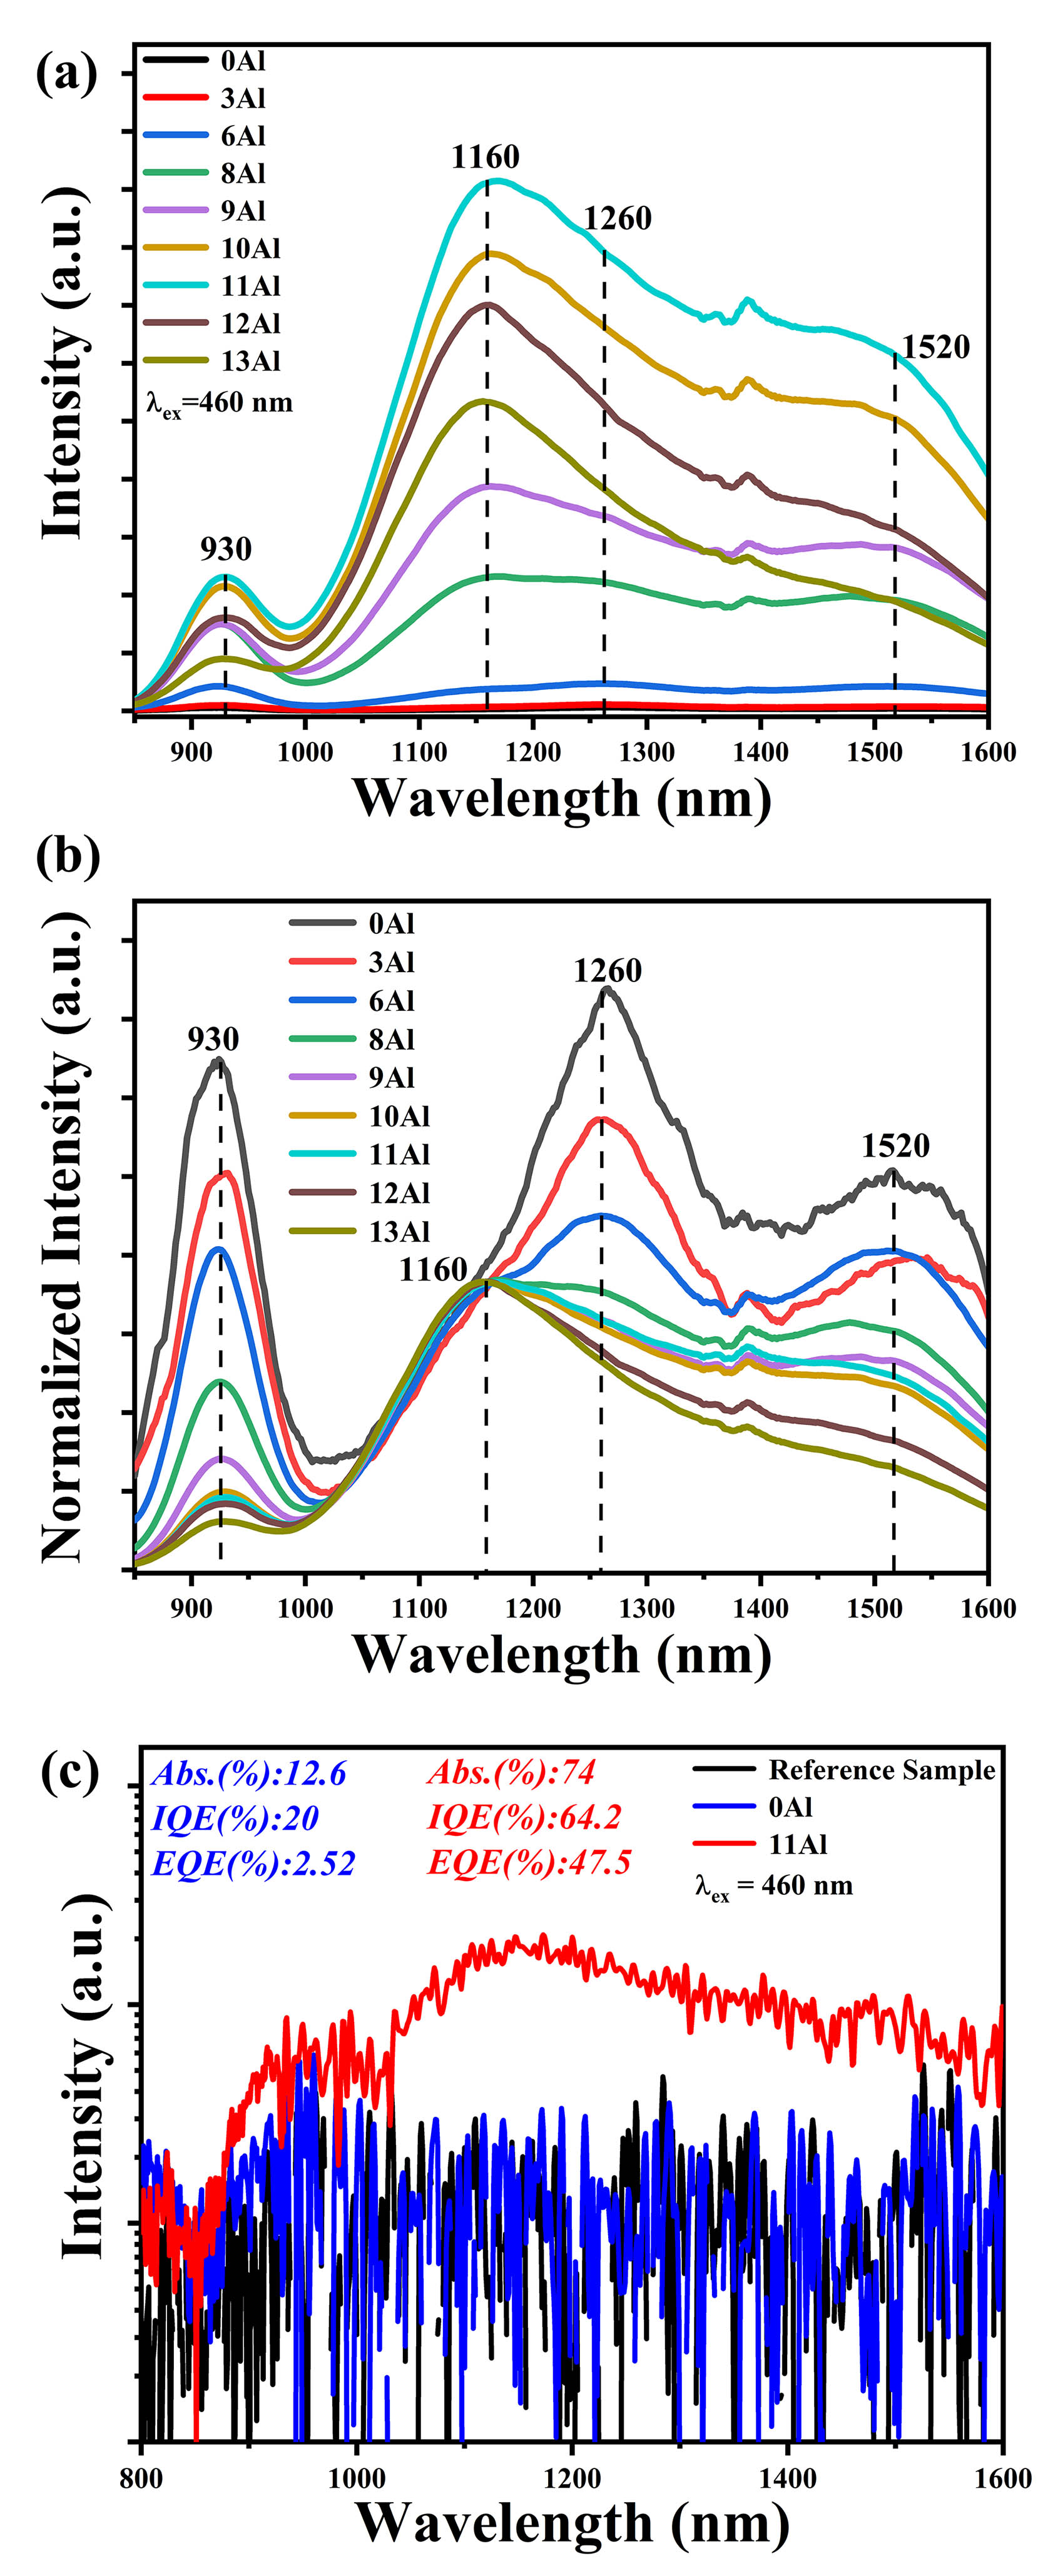 (a) NIR PL emission spectra (λex = 460 nm) of Bi-doped nitridated germanate glasses containing xAl2O3 (x = 0–13%); (b) corresponding emission spectra normalized to the emission peak at 1160 nm; (c) emission spectra inside the integrating sphere without and with the sample 0Al or 11Al upon 460 nm excitation; inset shows the magnified spectra in the wavelength range of 800 to 1600 nm.